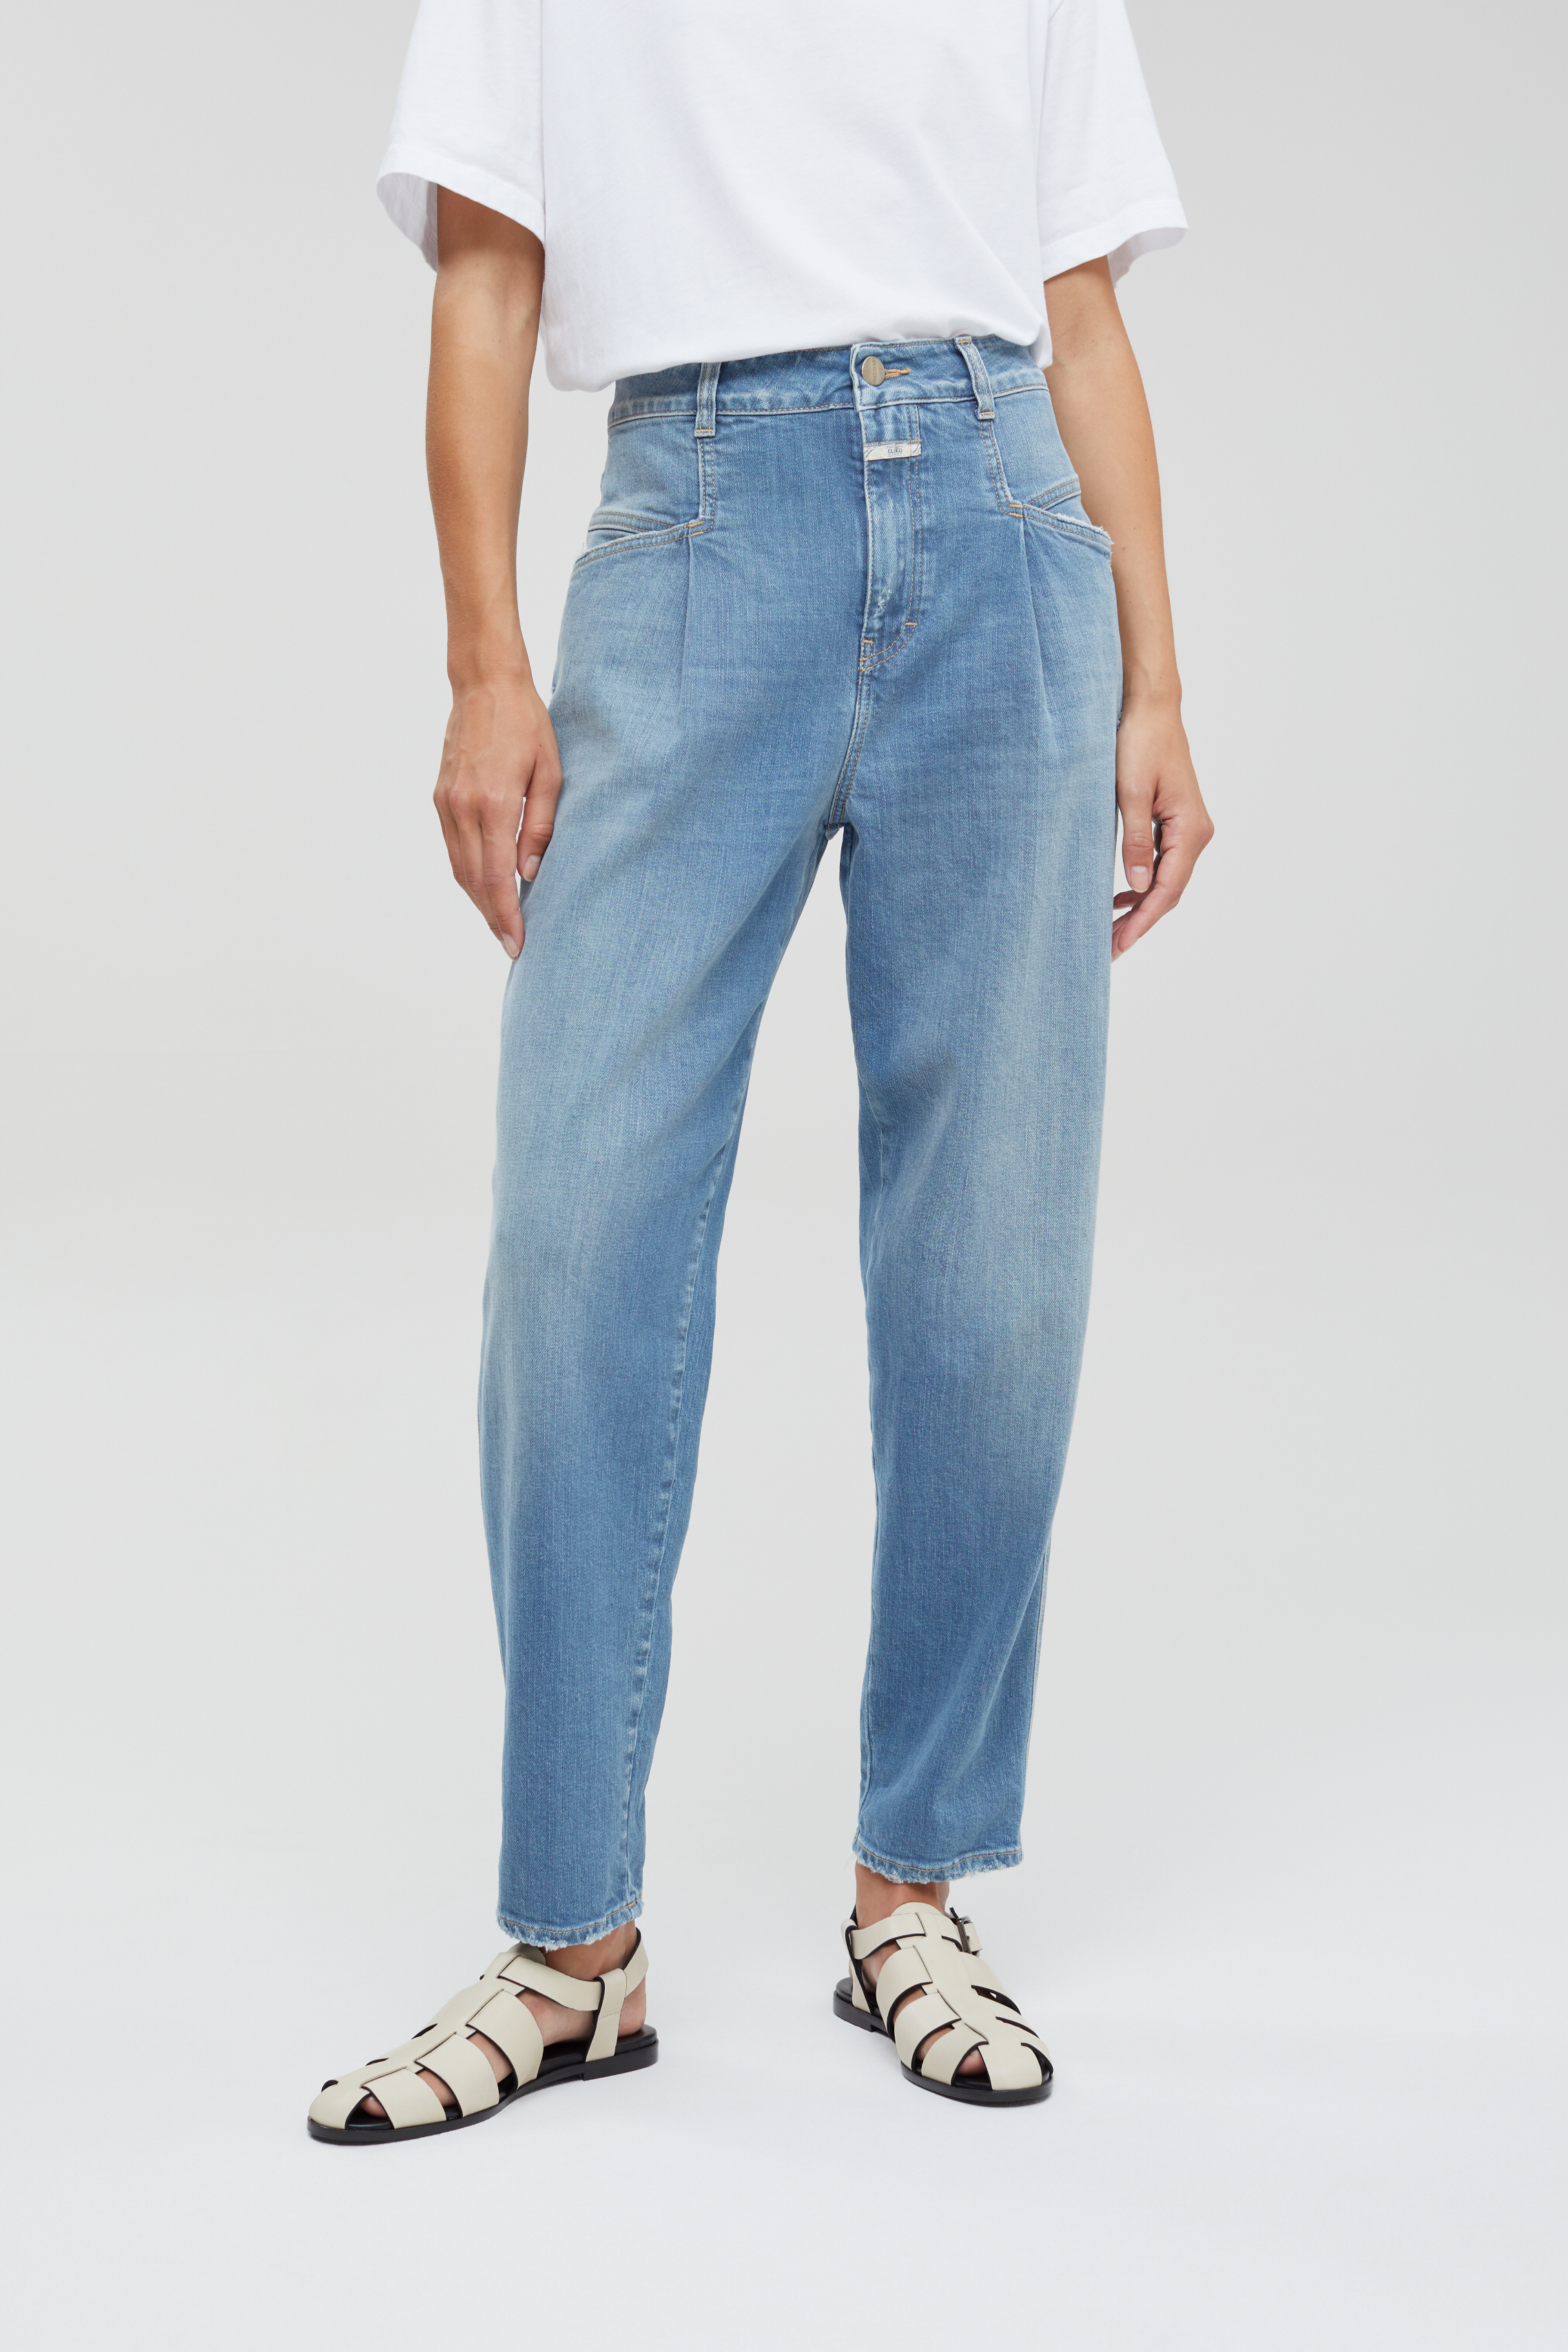 Pearl Jeans